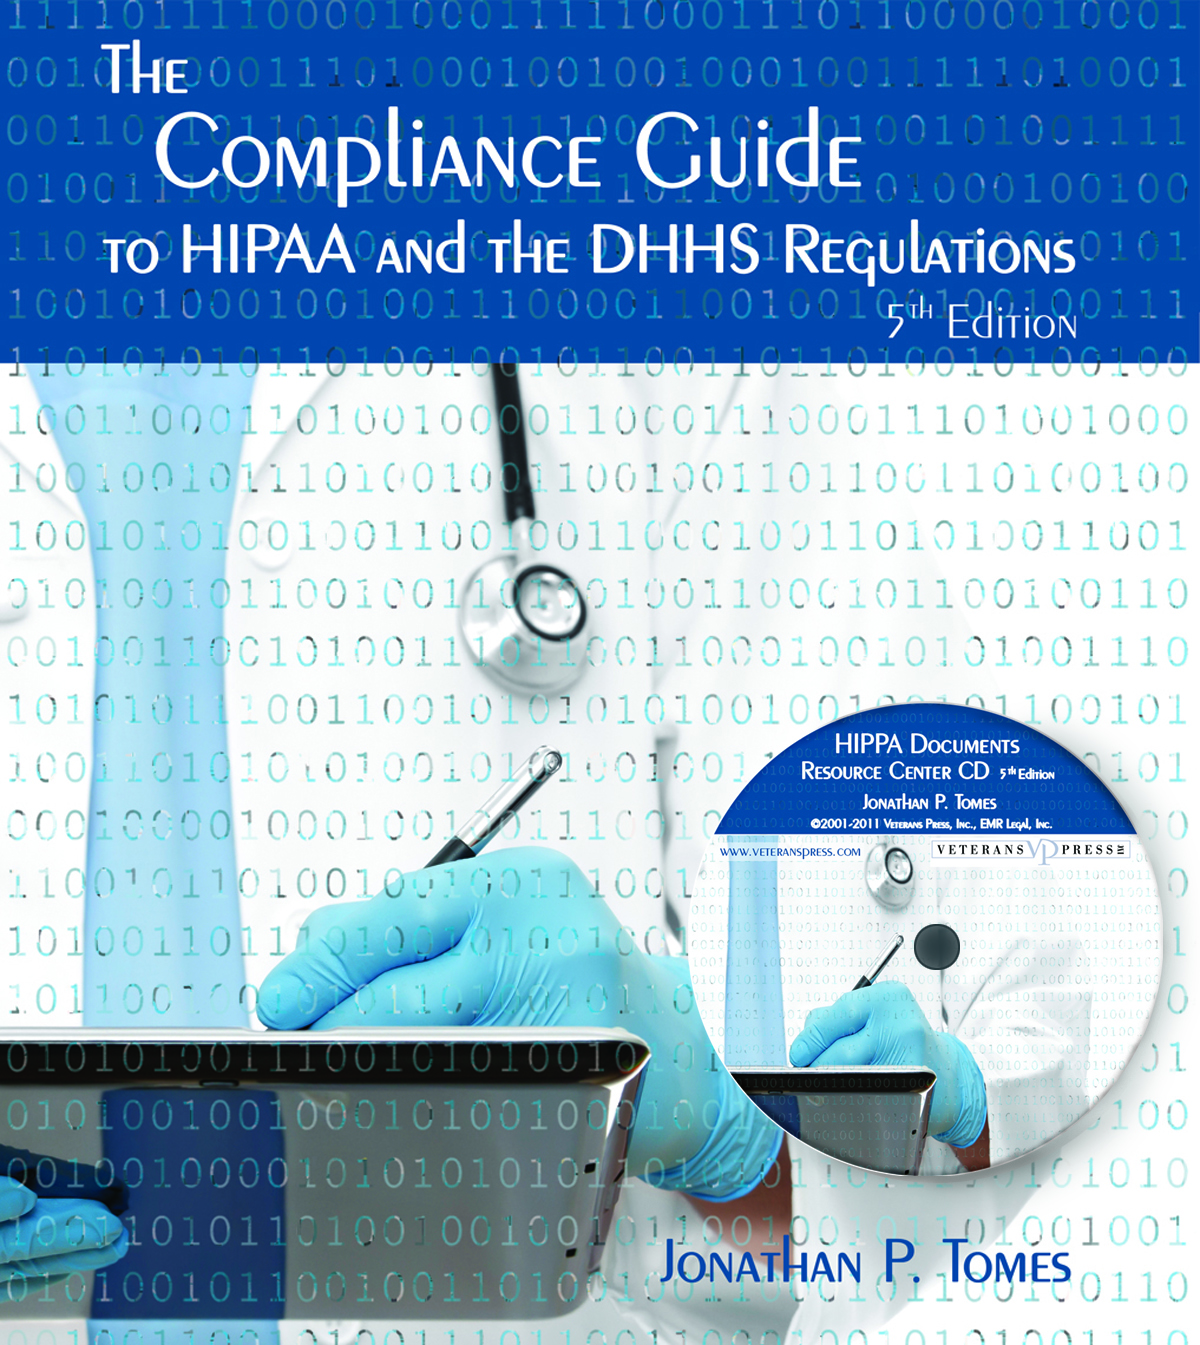 Compliance Guide to HIPAA and the DHHS Regulations, 6th ed., and accompanying HIPAA Policies and Procedures Resource Center CD, 6th ed.